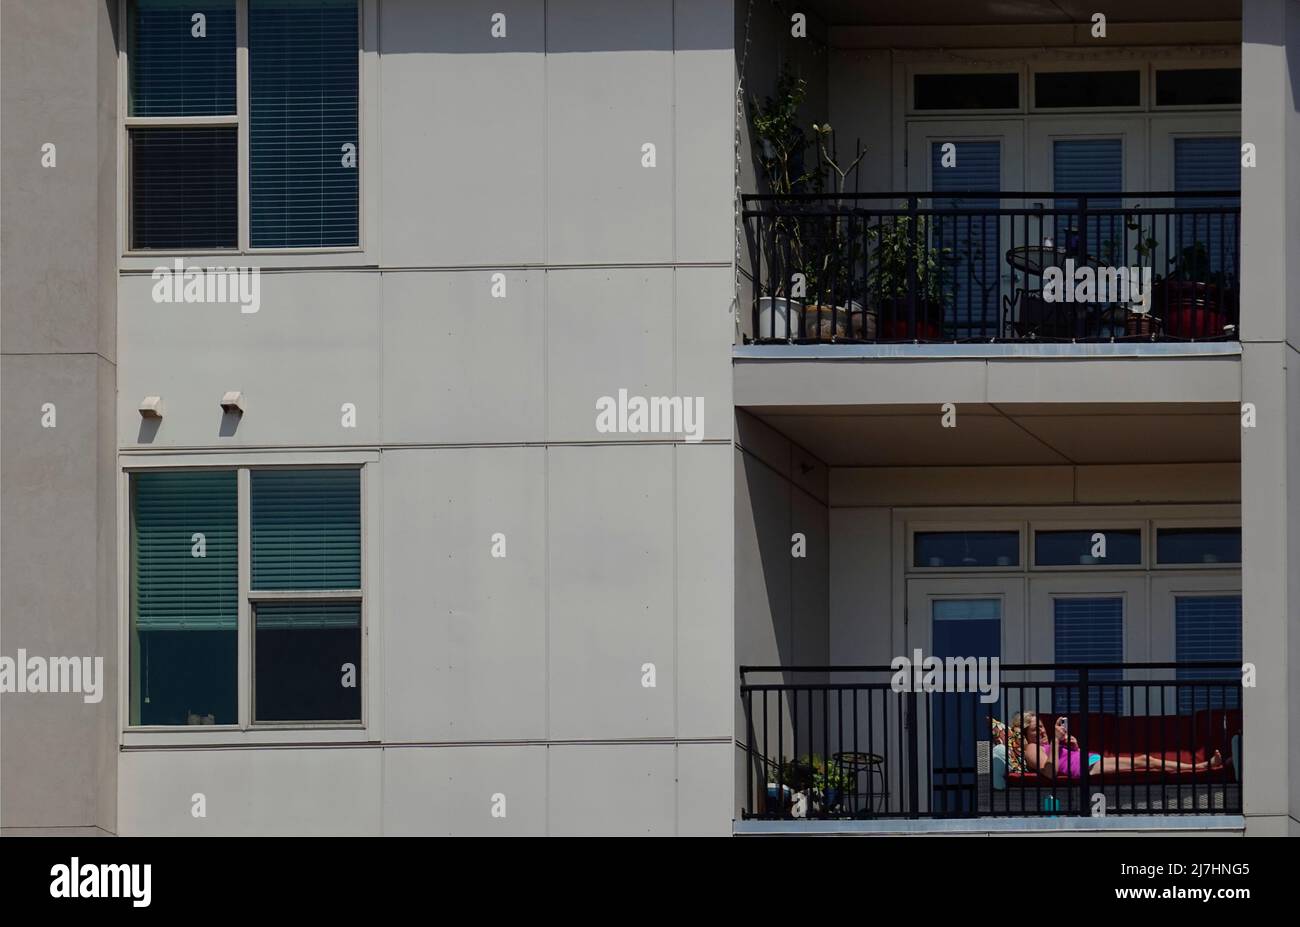 woman sitting on apartment balcony using her cell phone in Greenville SC Stock Photo